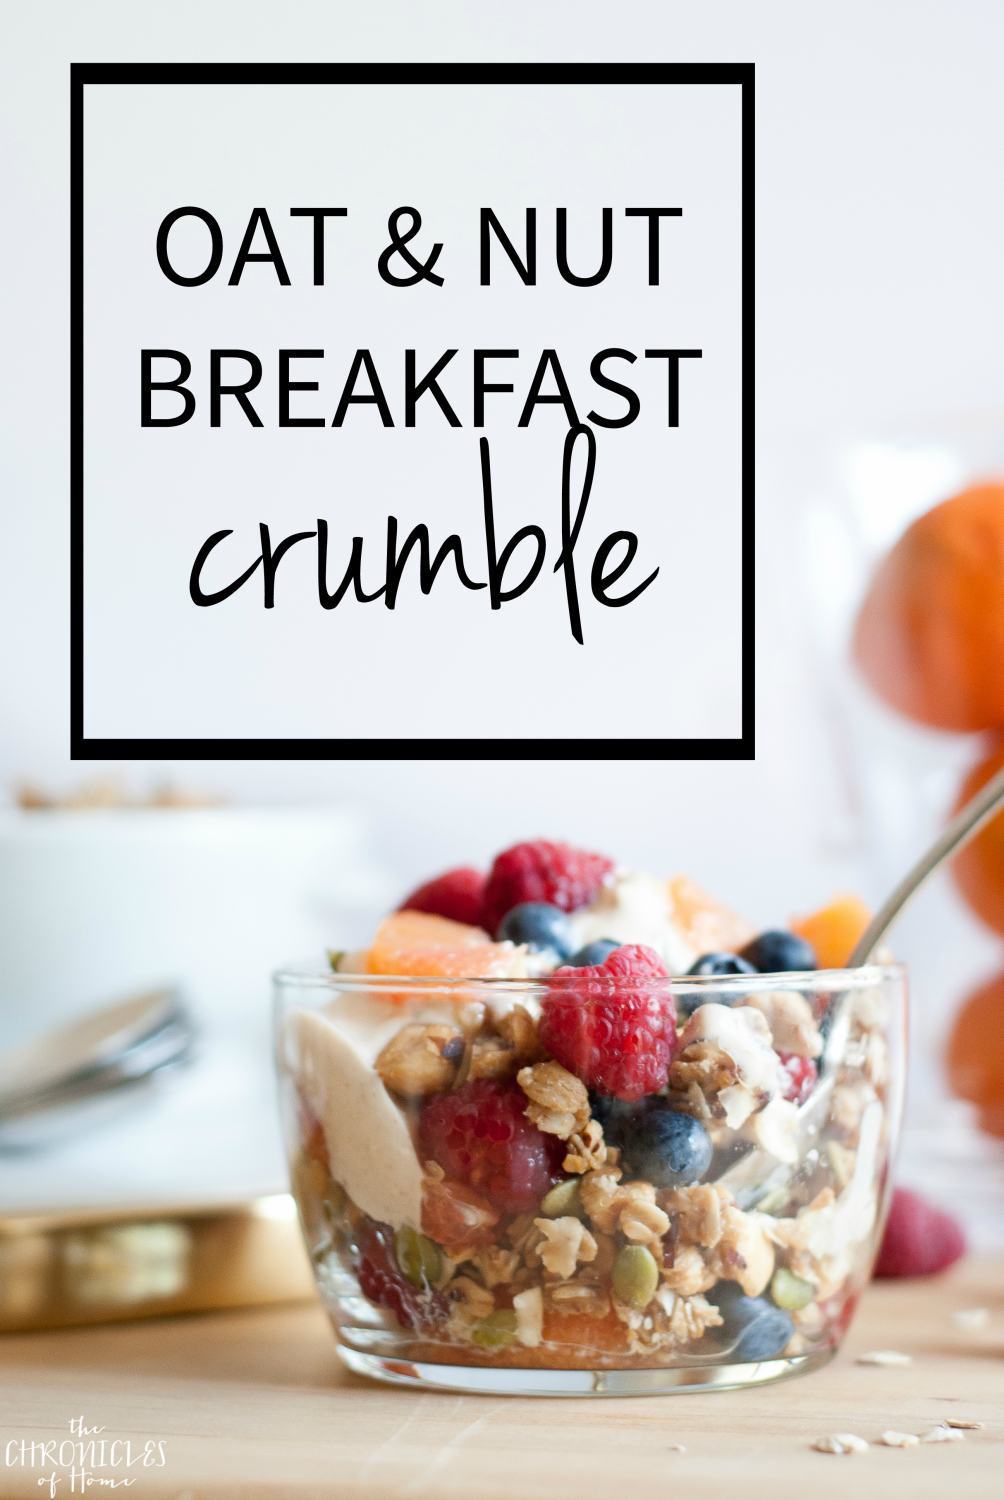 Oat and nut breakfast crumble - healthy, hearty, and delicious with nuts, seeds, fresh fruit, and an easy homemade cinnamon yogurt drizzle